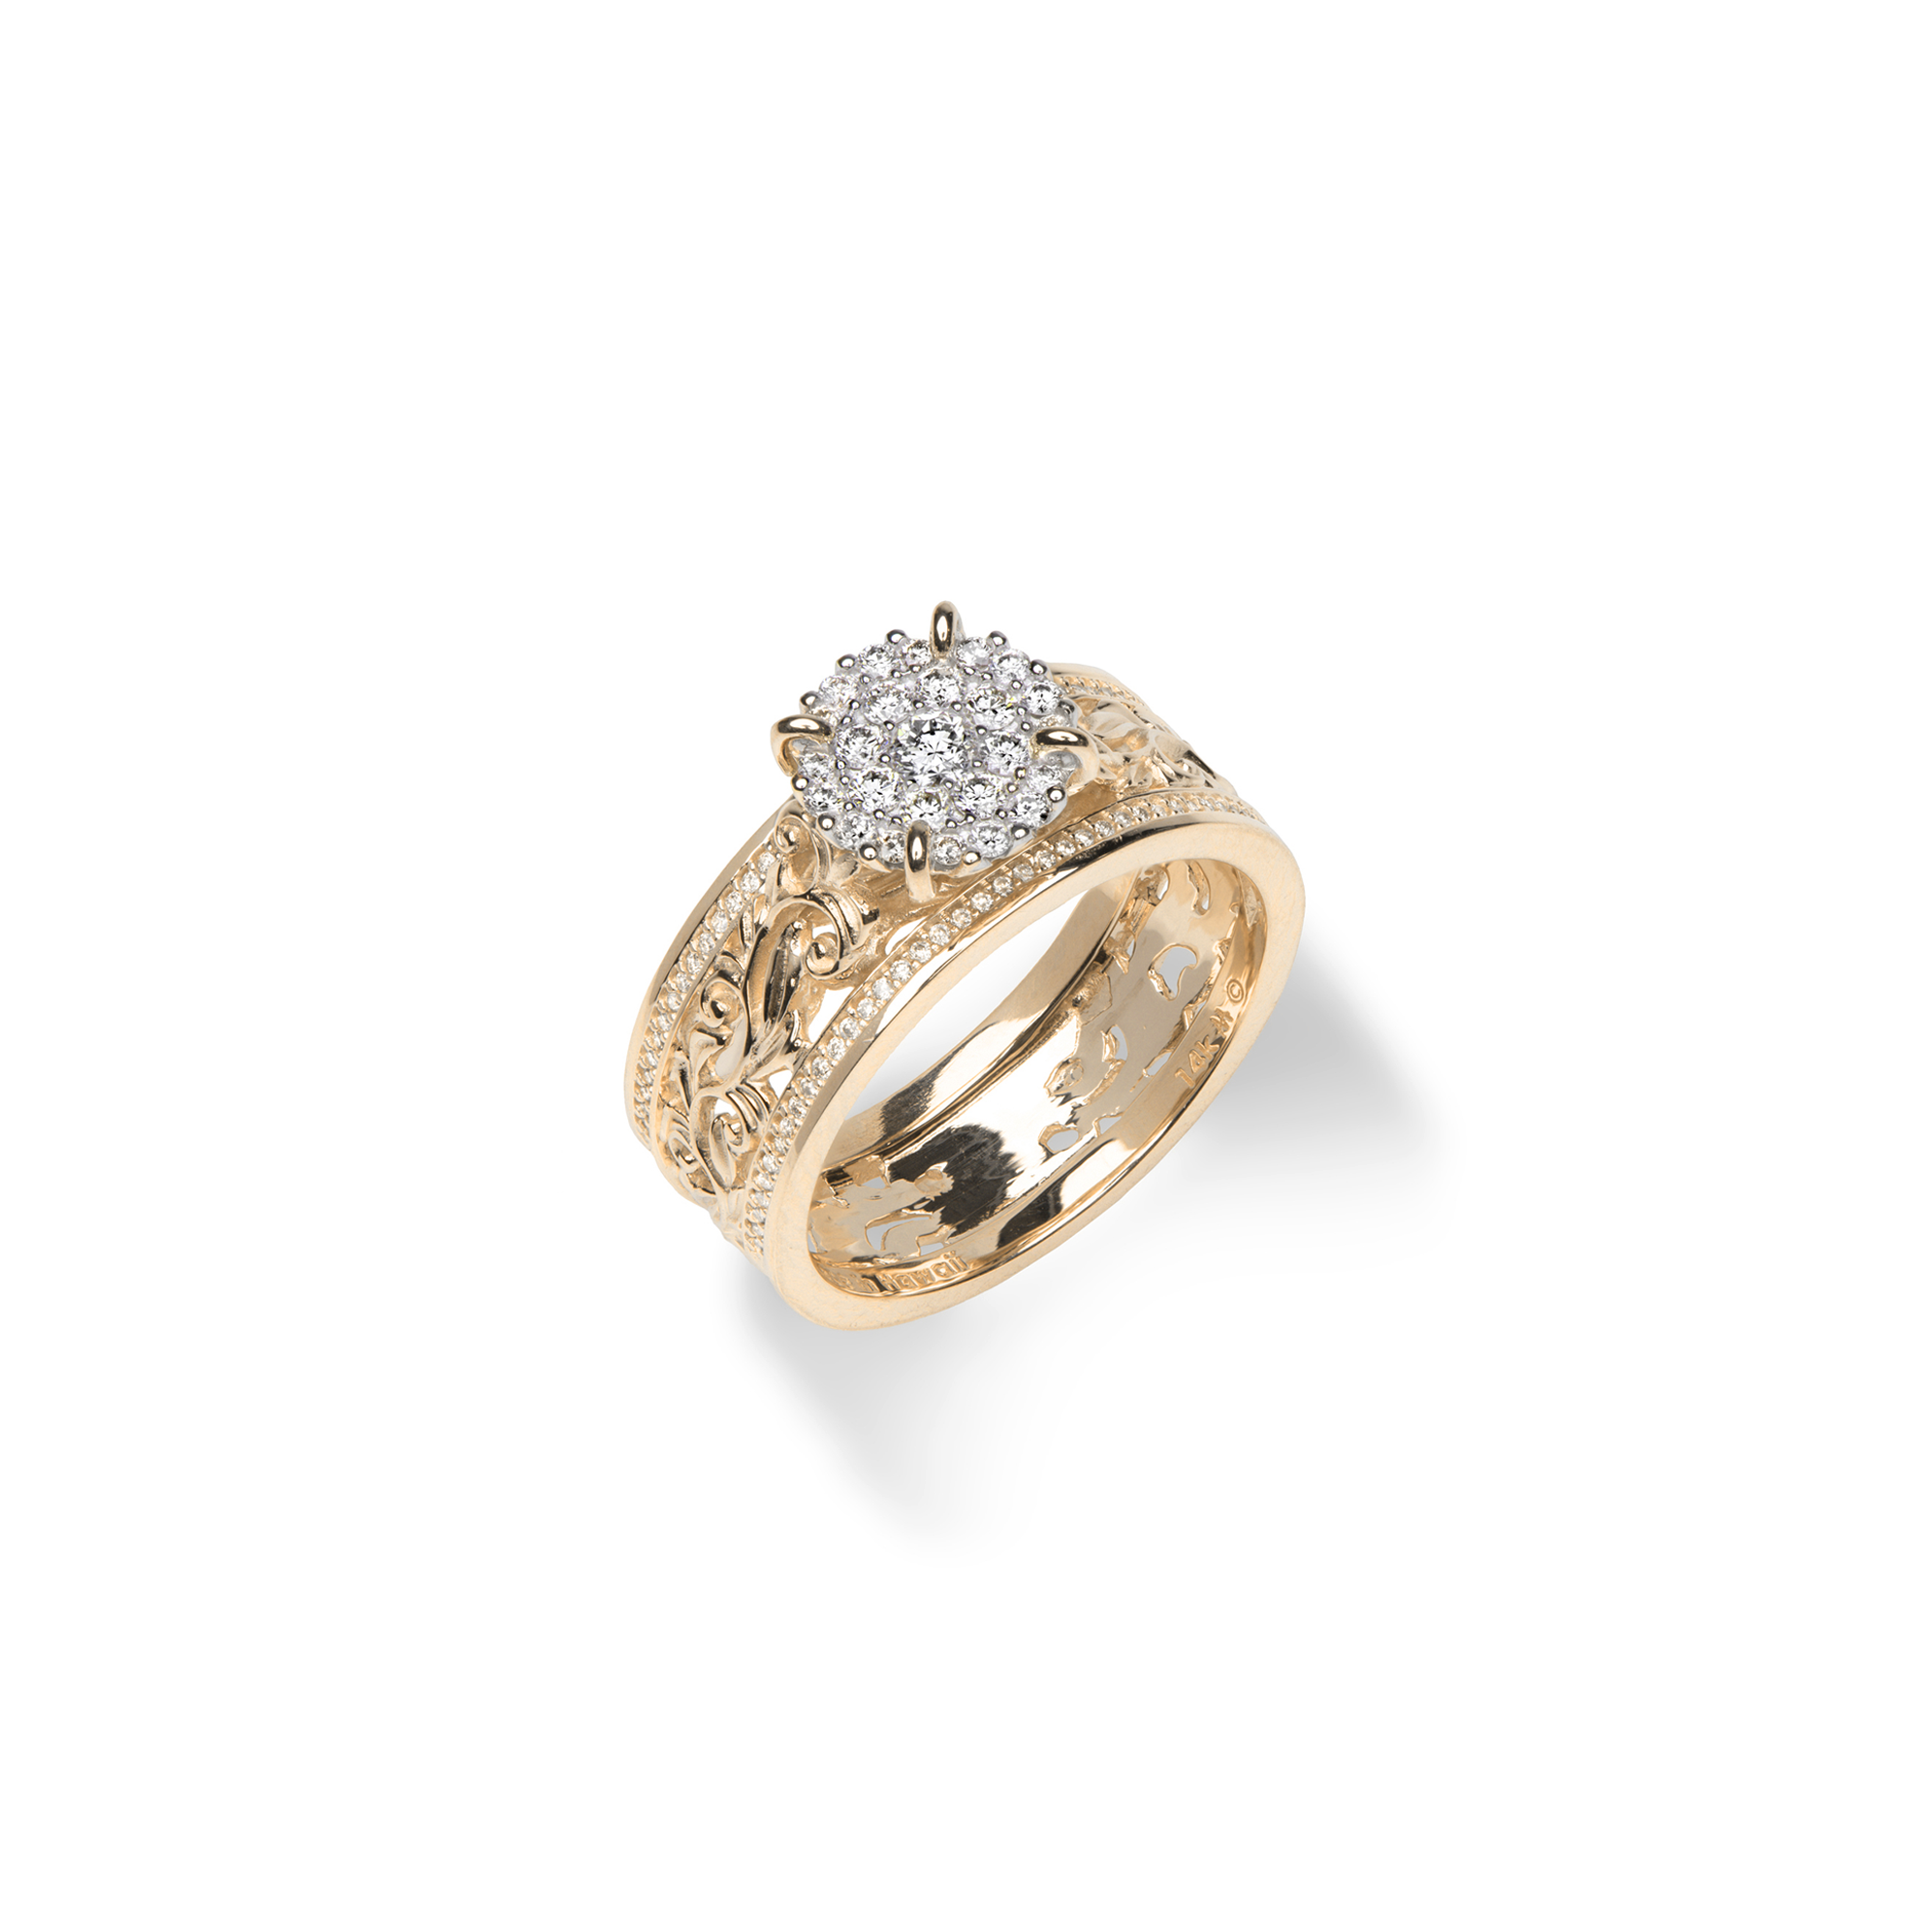 Living Heirloom Engagement Ring in Gold with Diamonds - 7mm